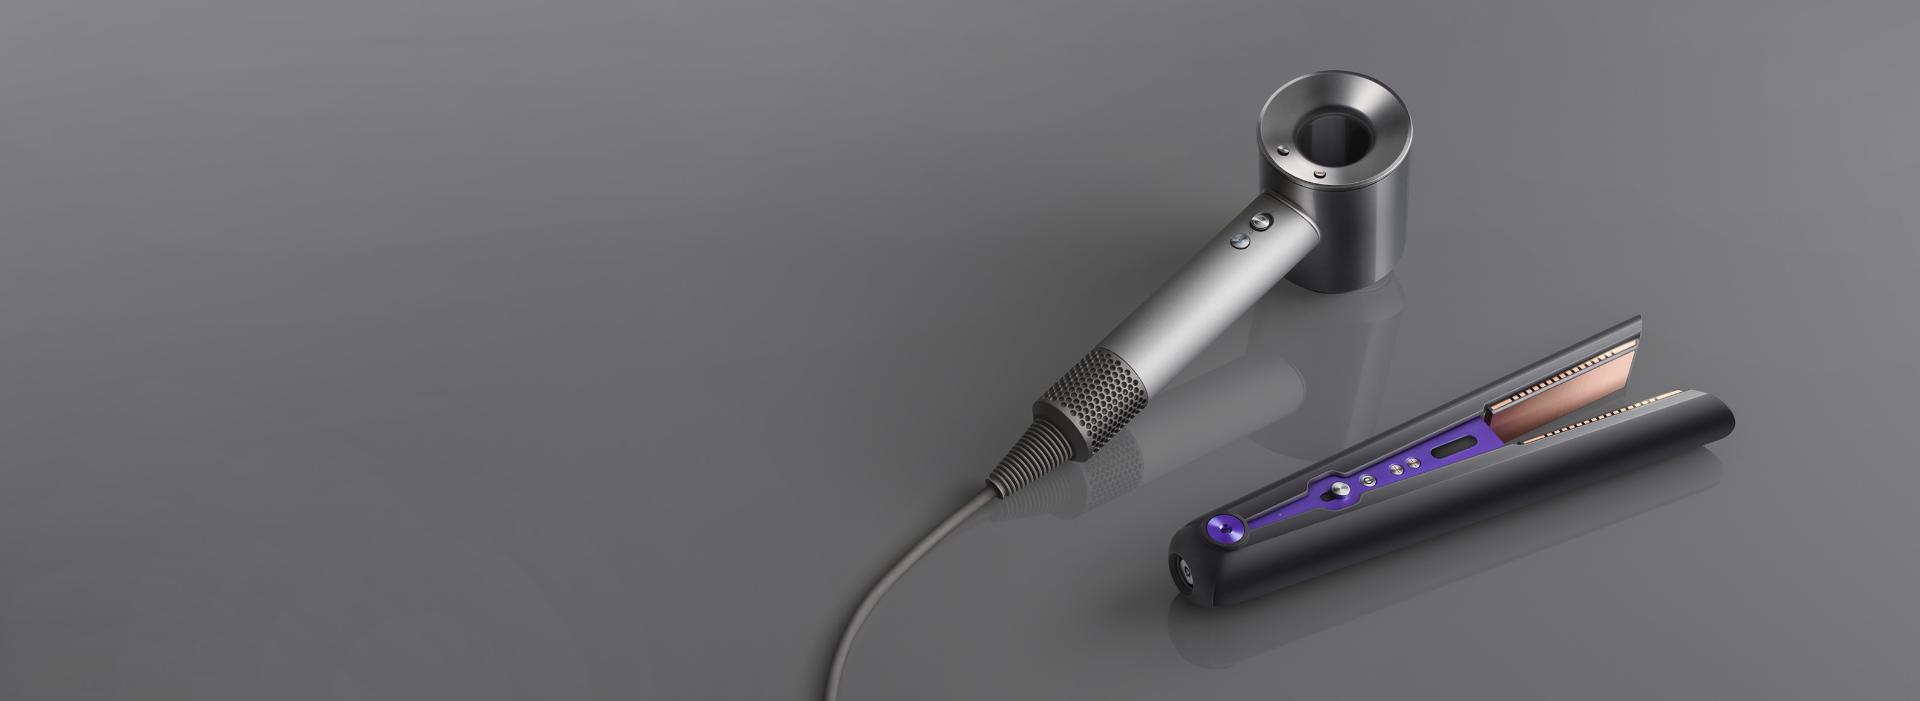 The selection of Dyson professional hair care machines